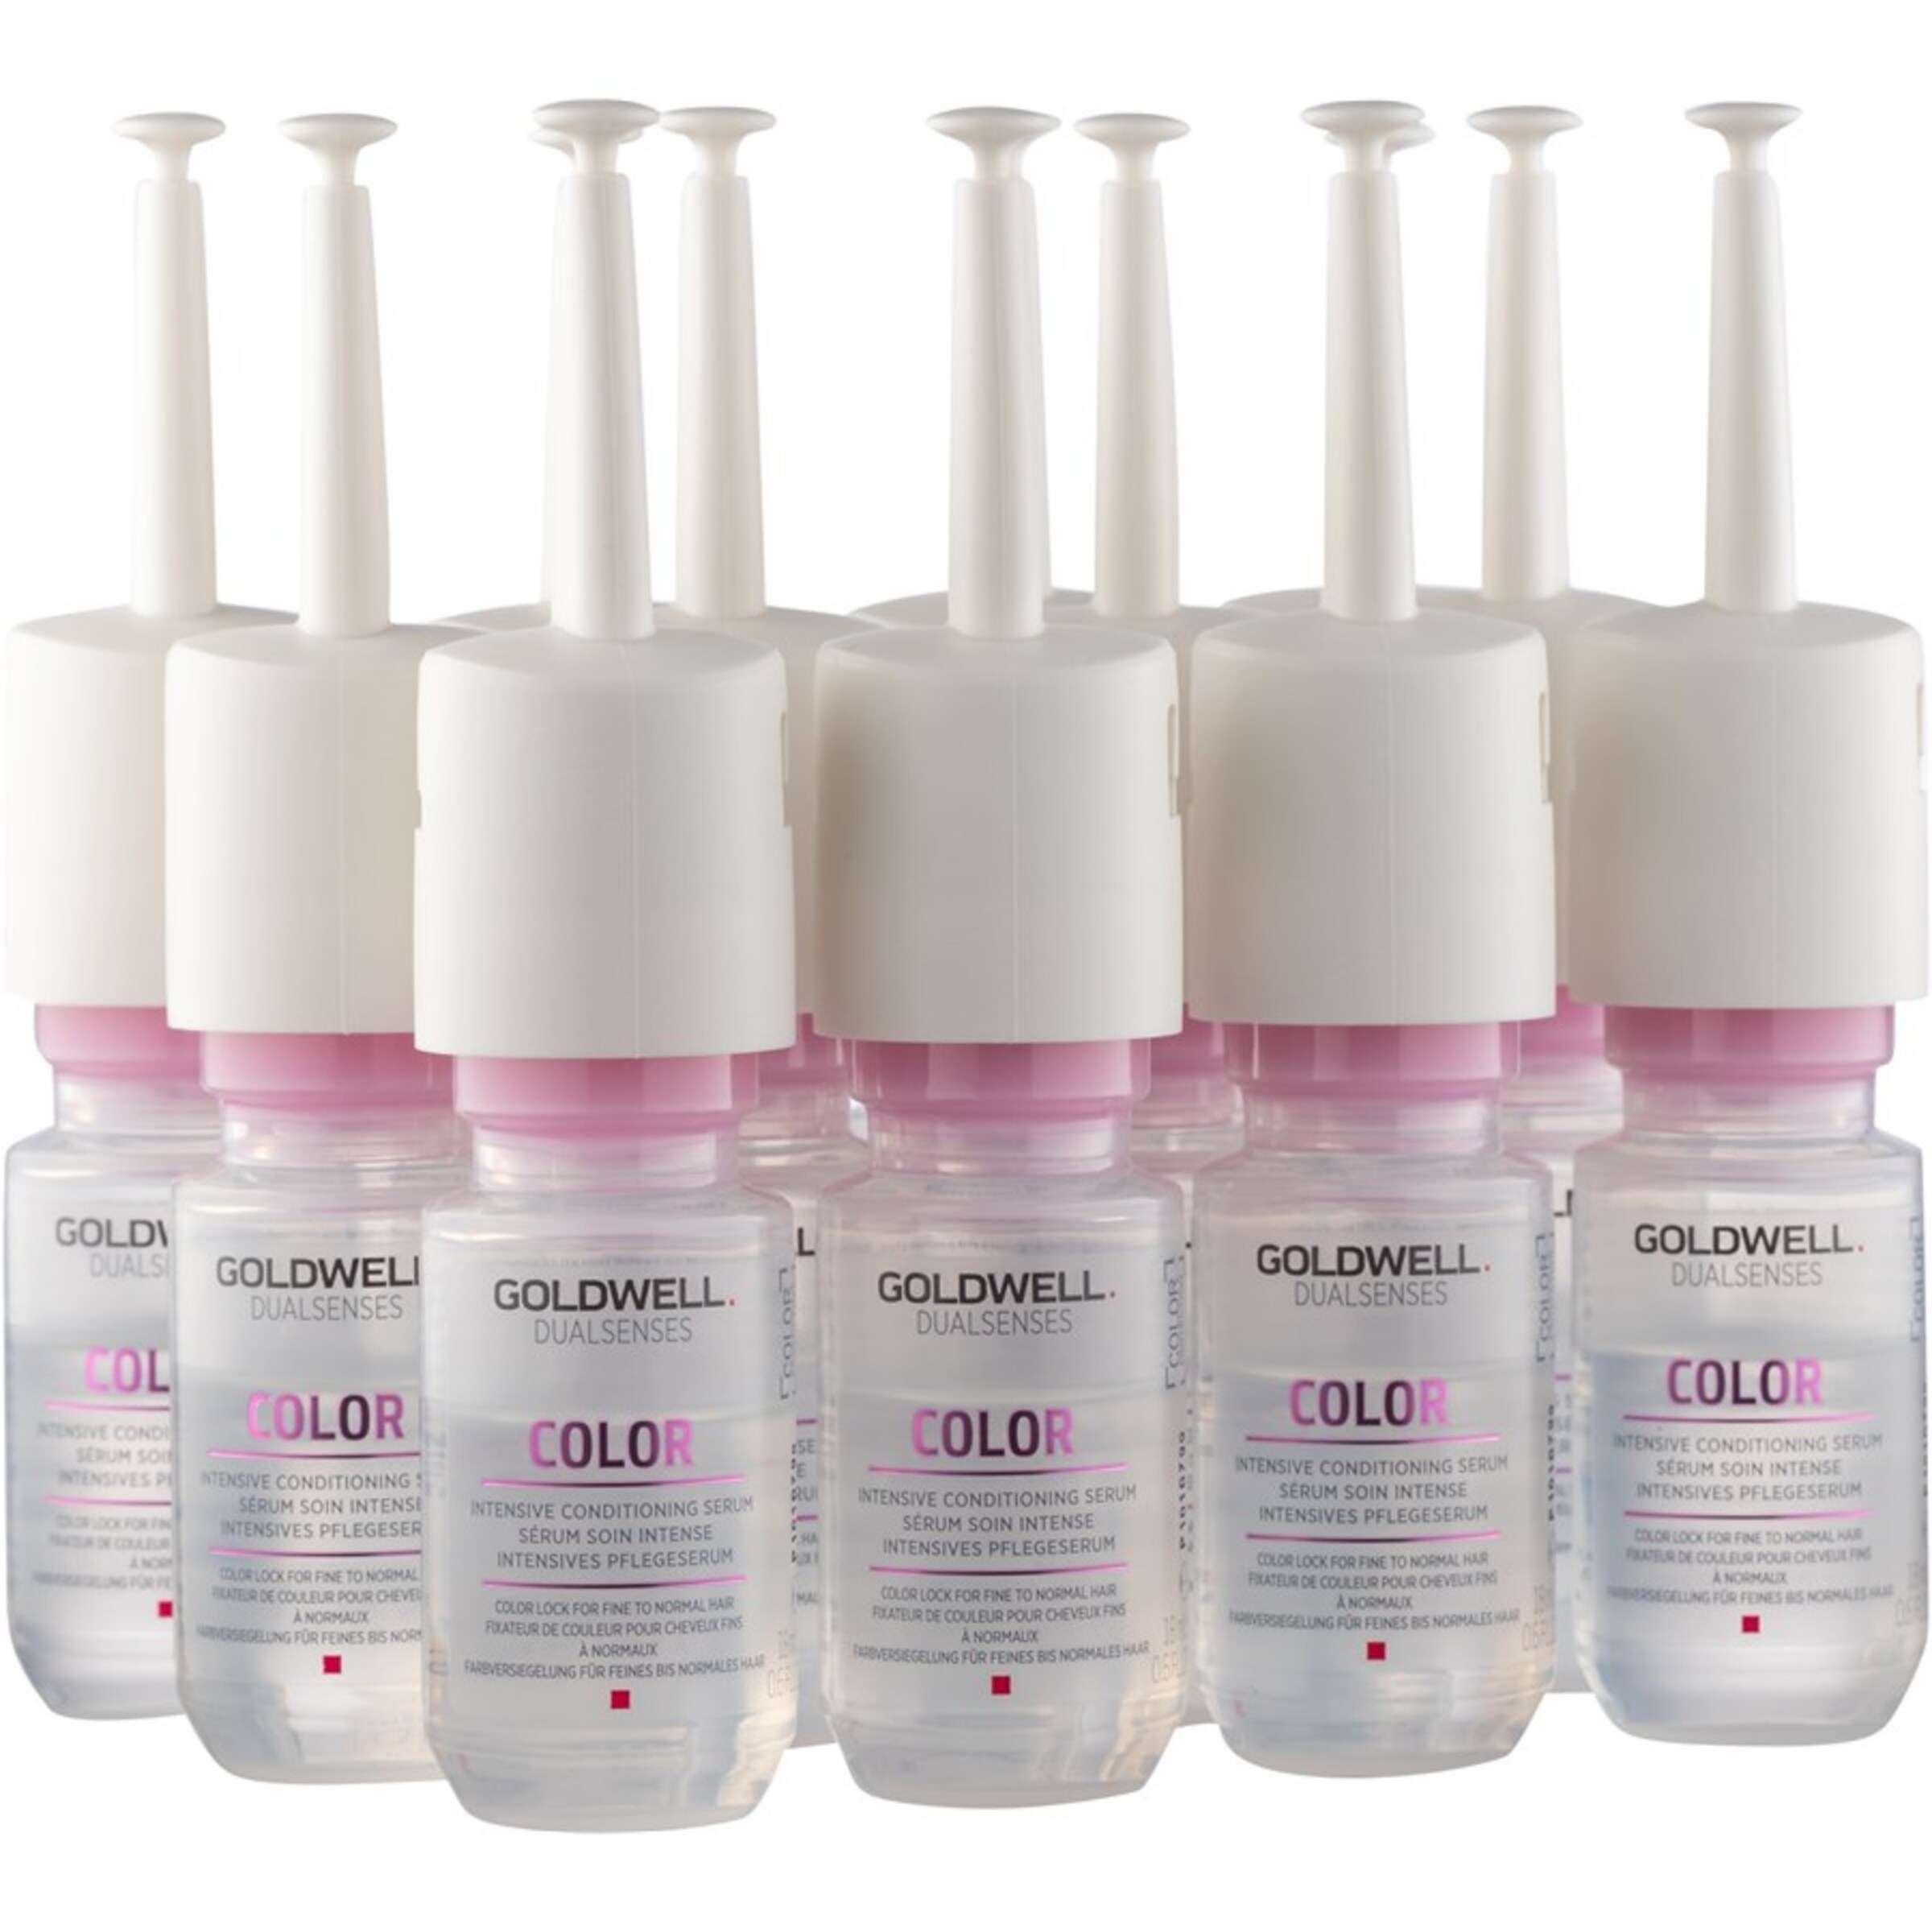 Goldwell Serum Intensive Conditioning in 